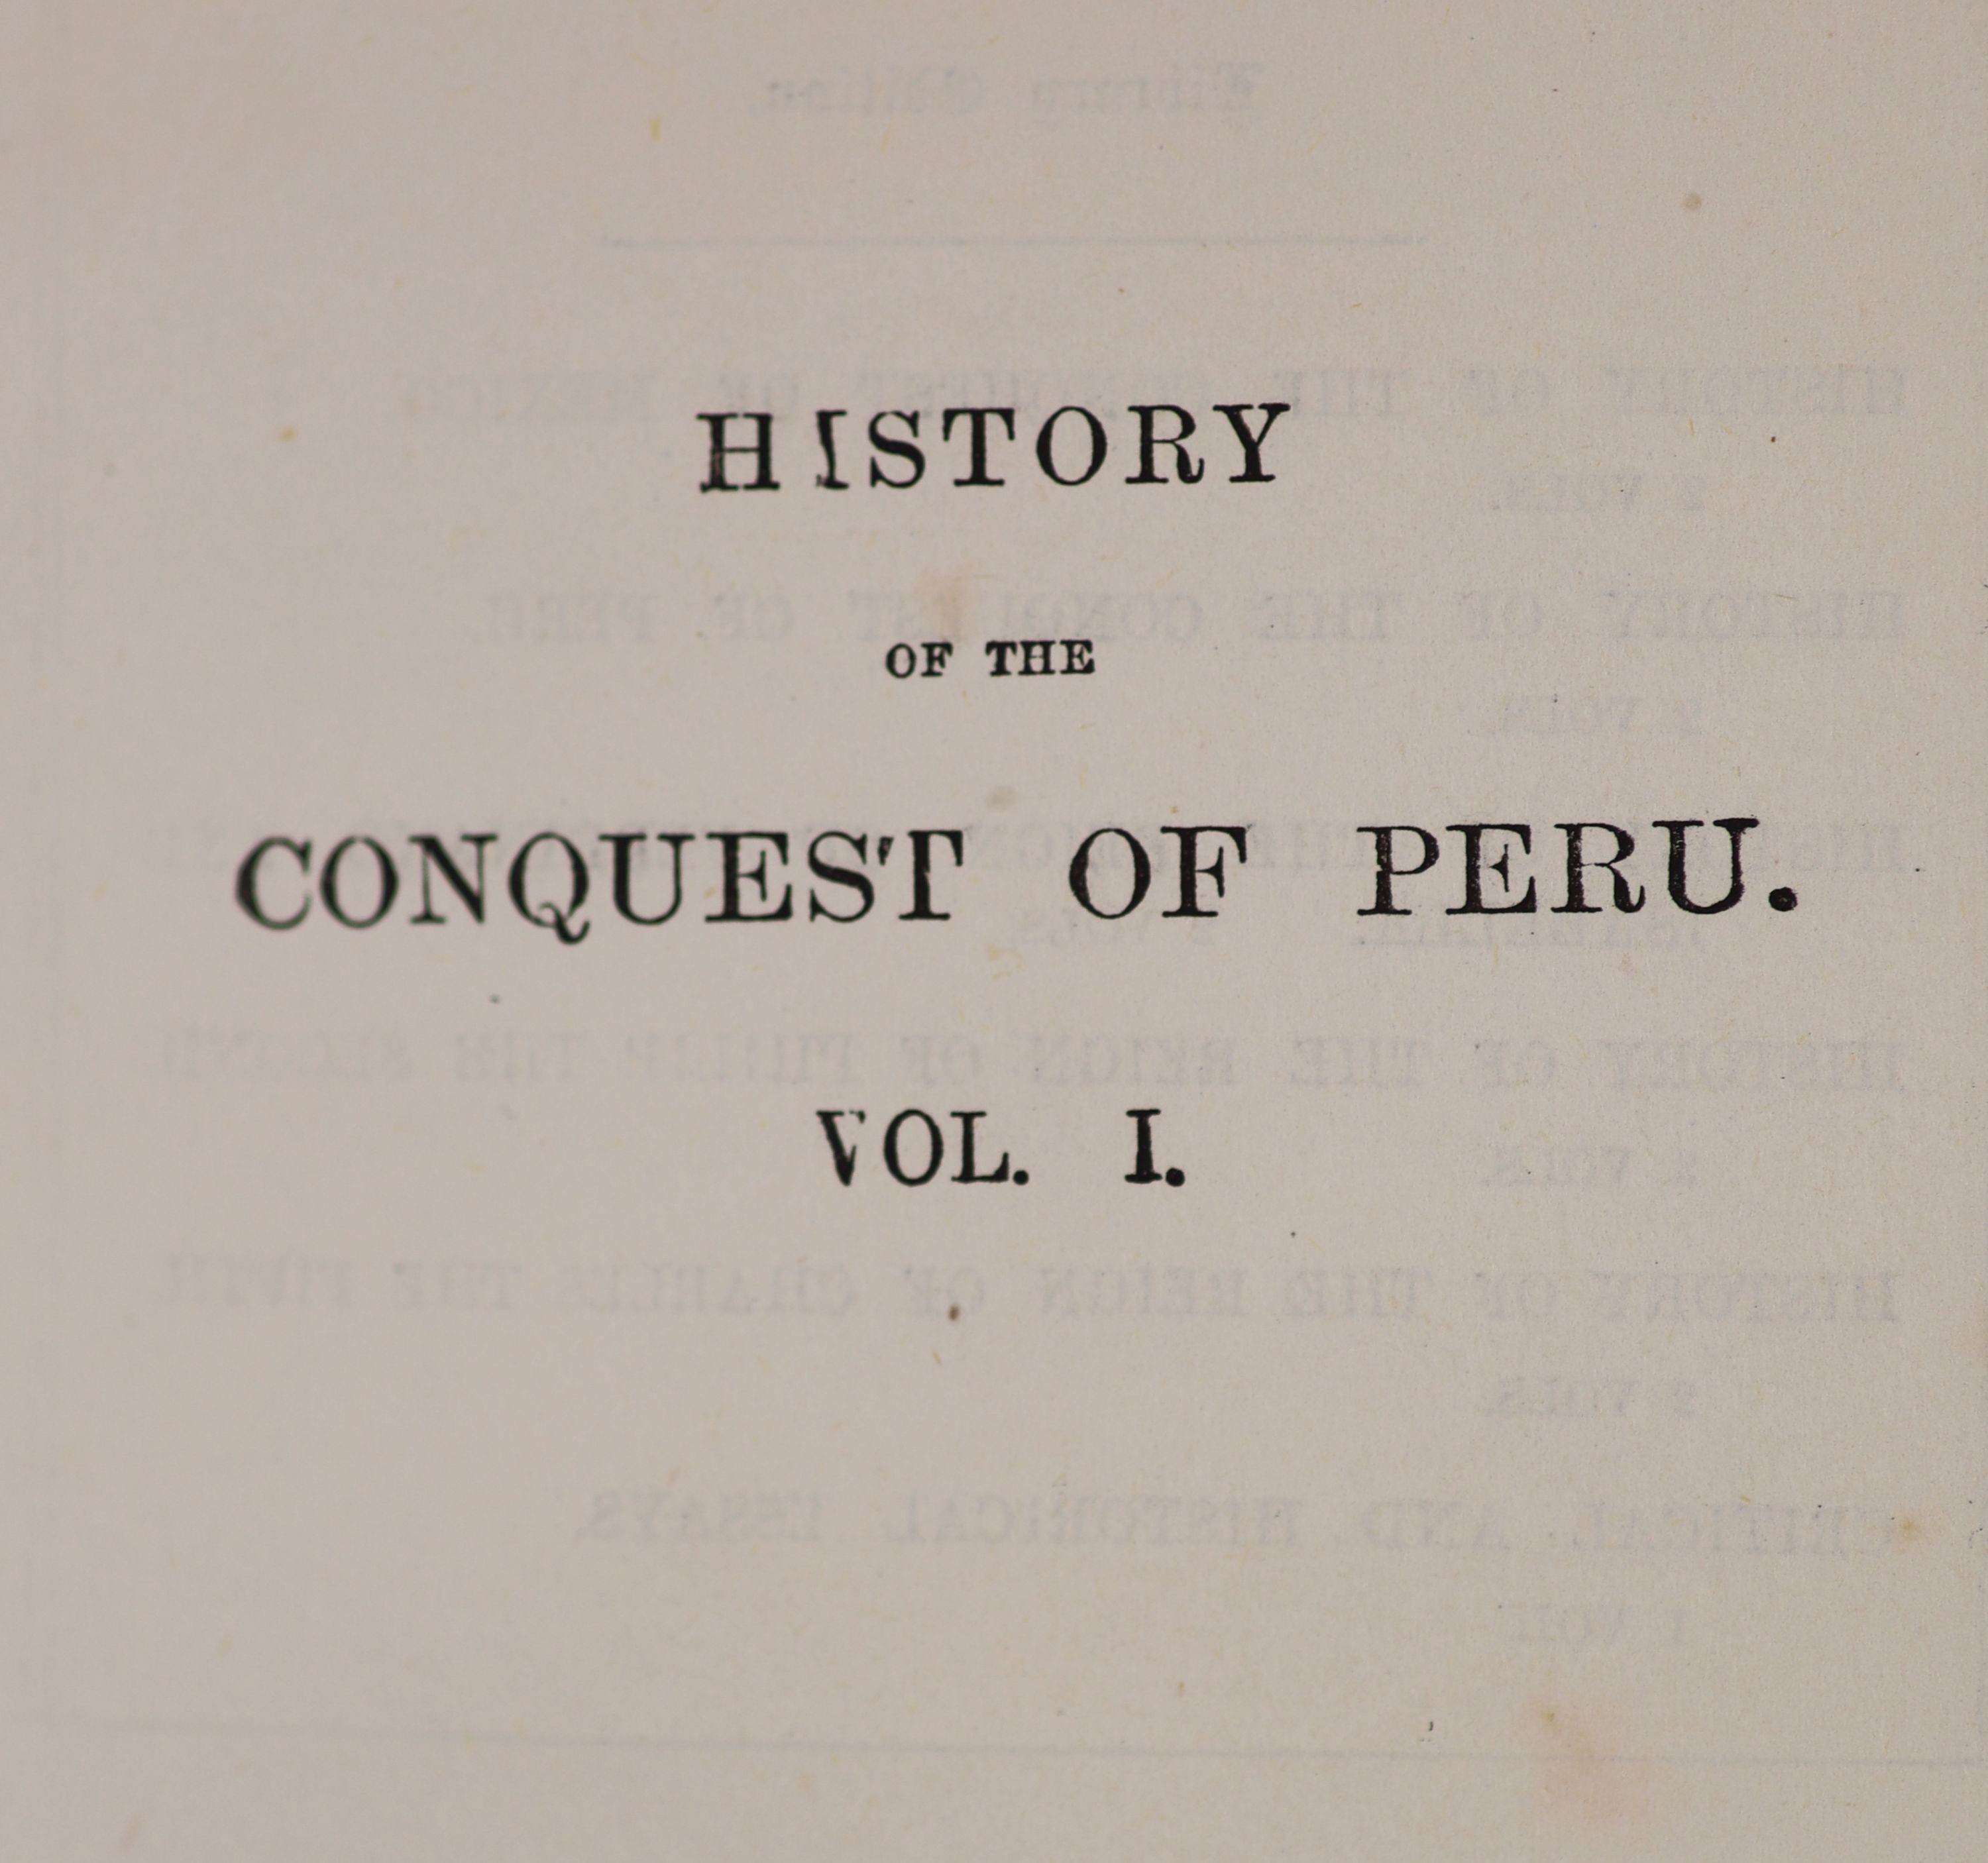 Prescott, William, H - History of The Conquest Of Peru; with a preliminary view of the civilization on the Incas. New and revised edition… edited by John Foster Kirk. 2 volumes. Complete with frontis to each and an addit